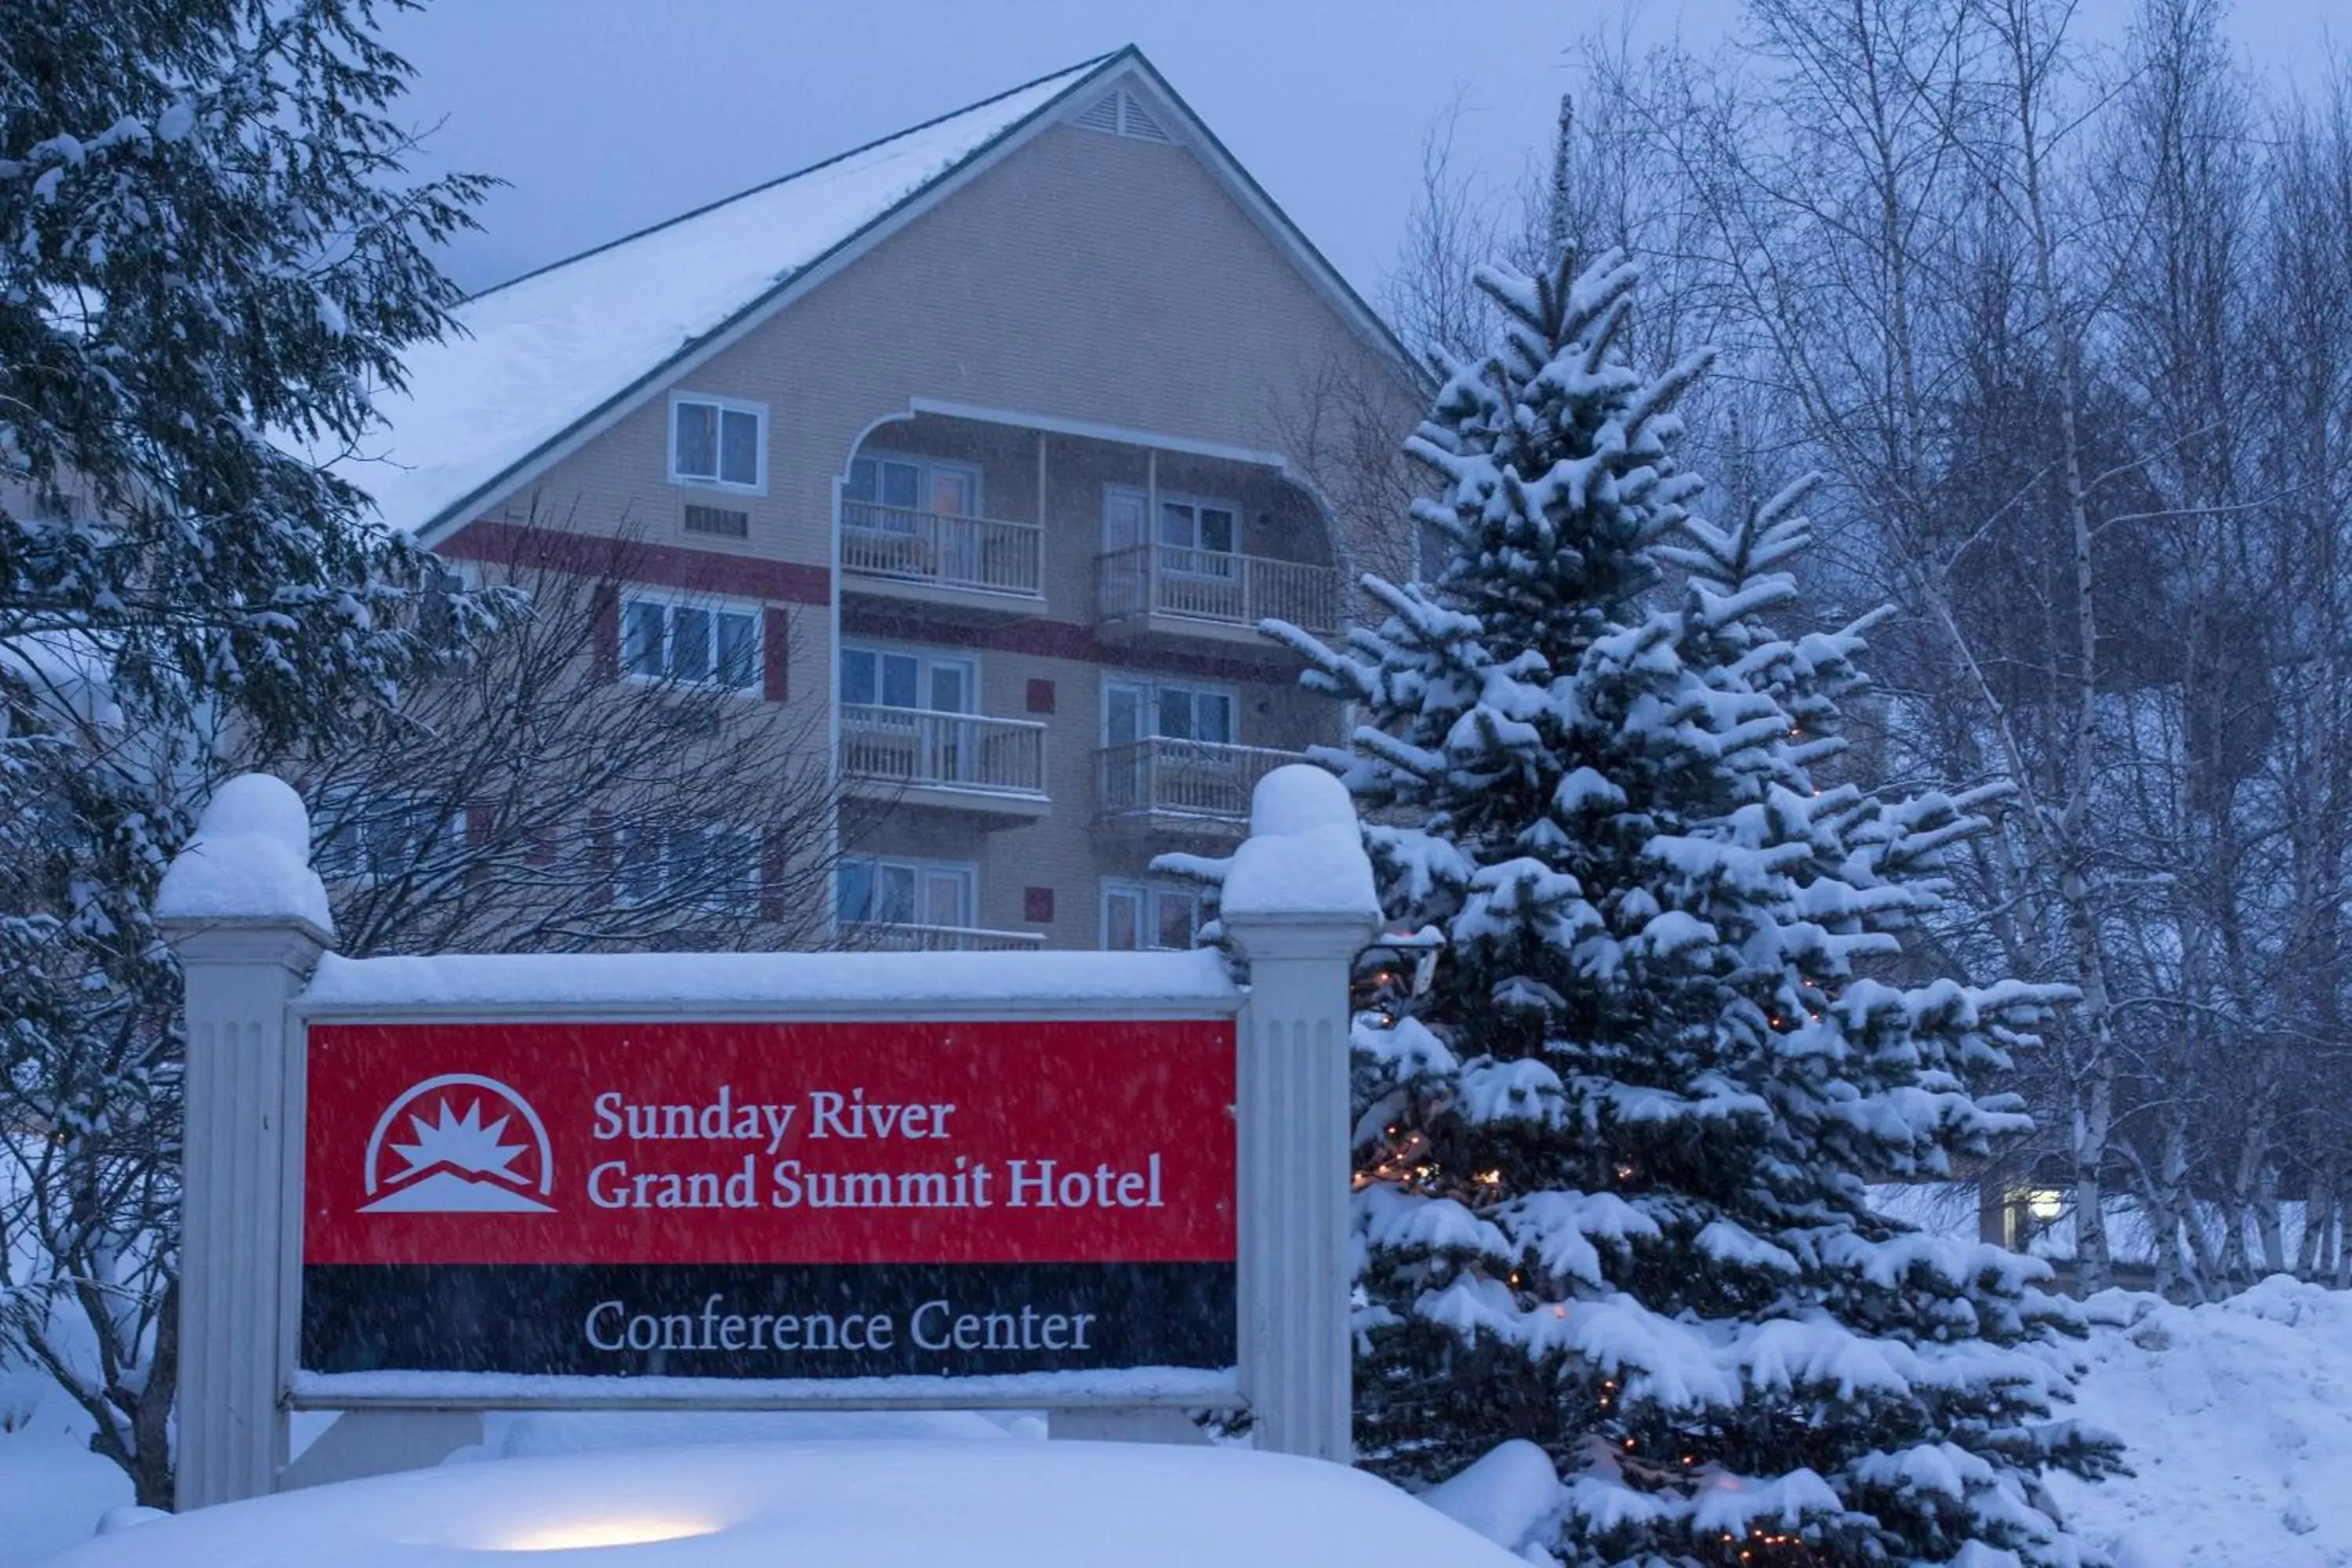 Property building, Winter in Grand Summit Hotel